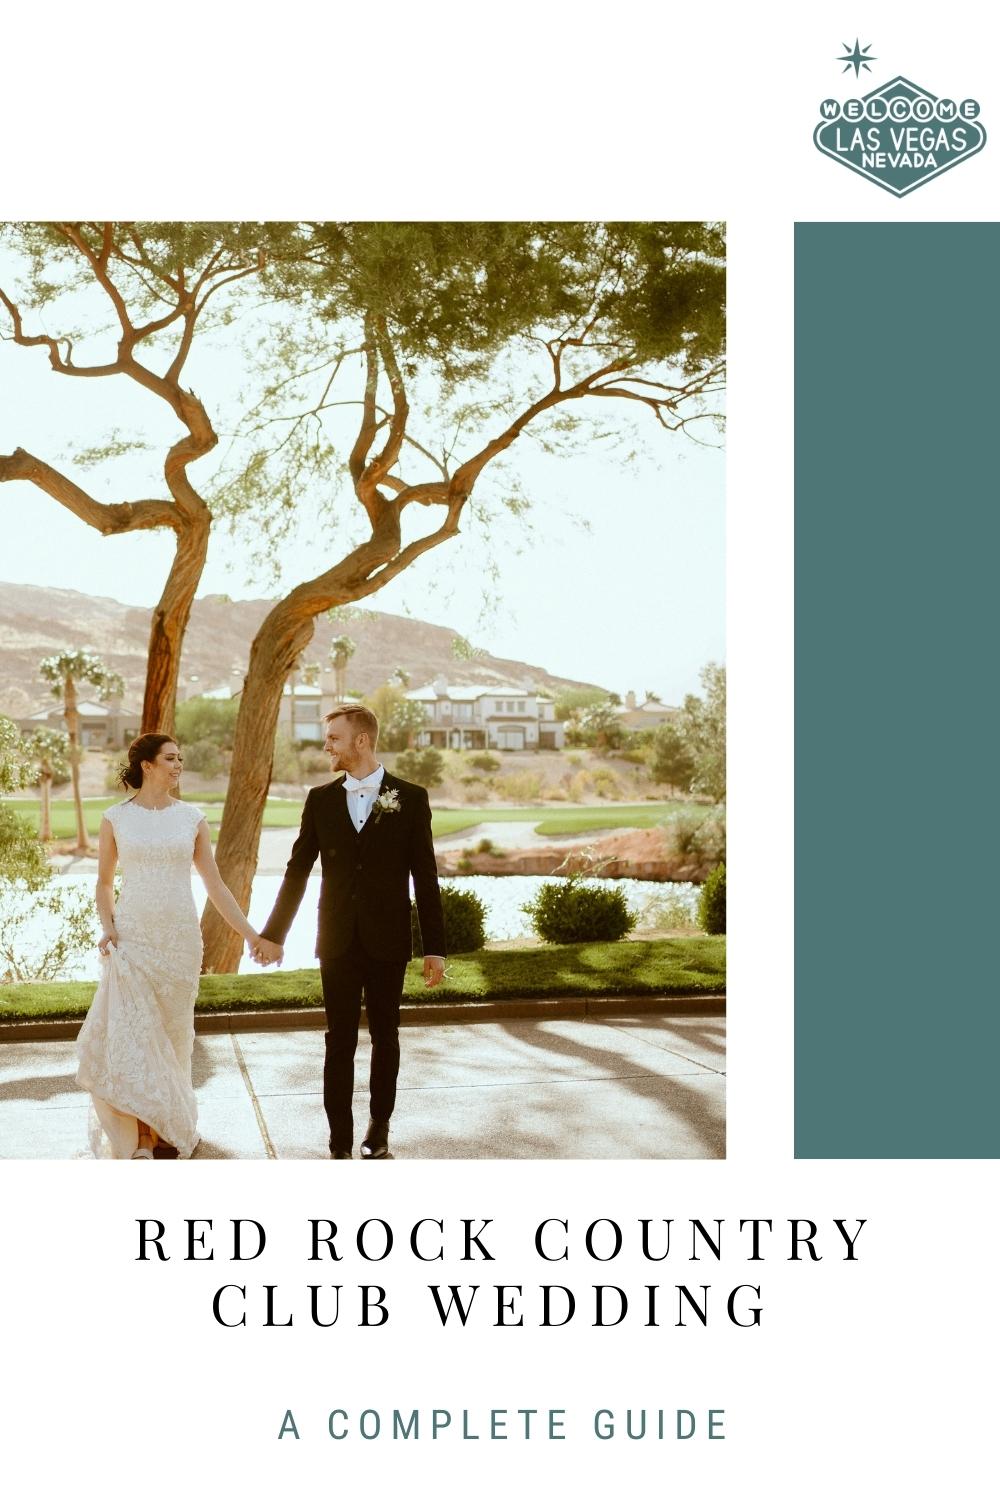 Newlywed couple holding hands and smiling at each other; image overlaid with text that reads Red Rock Country Club Wedding A Complete Guide